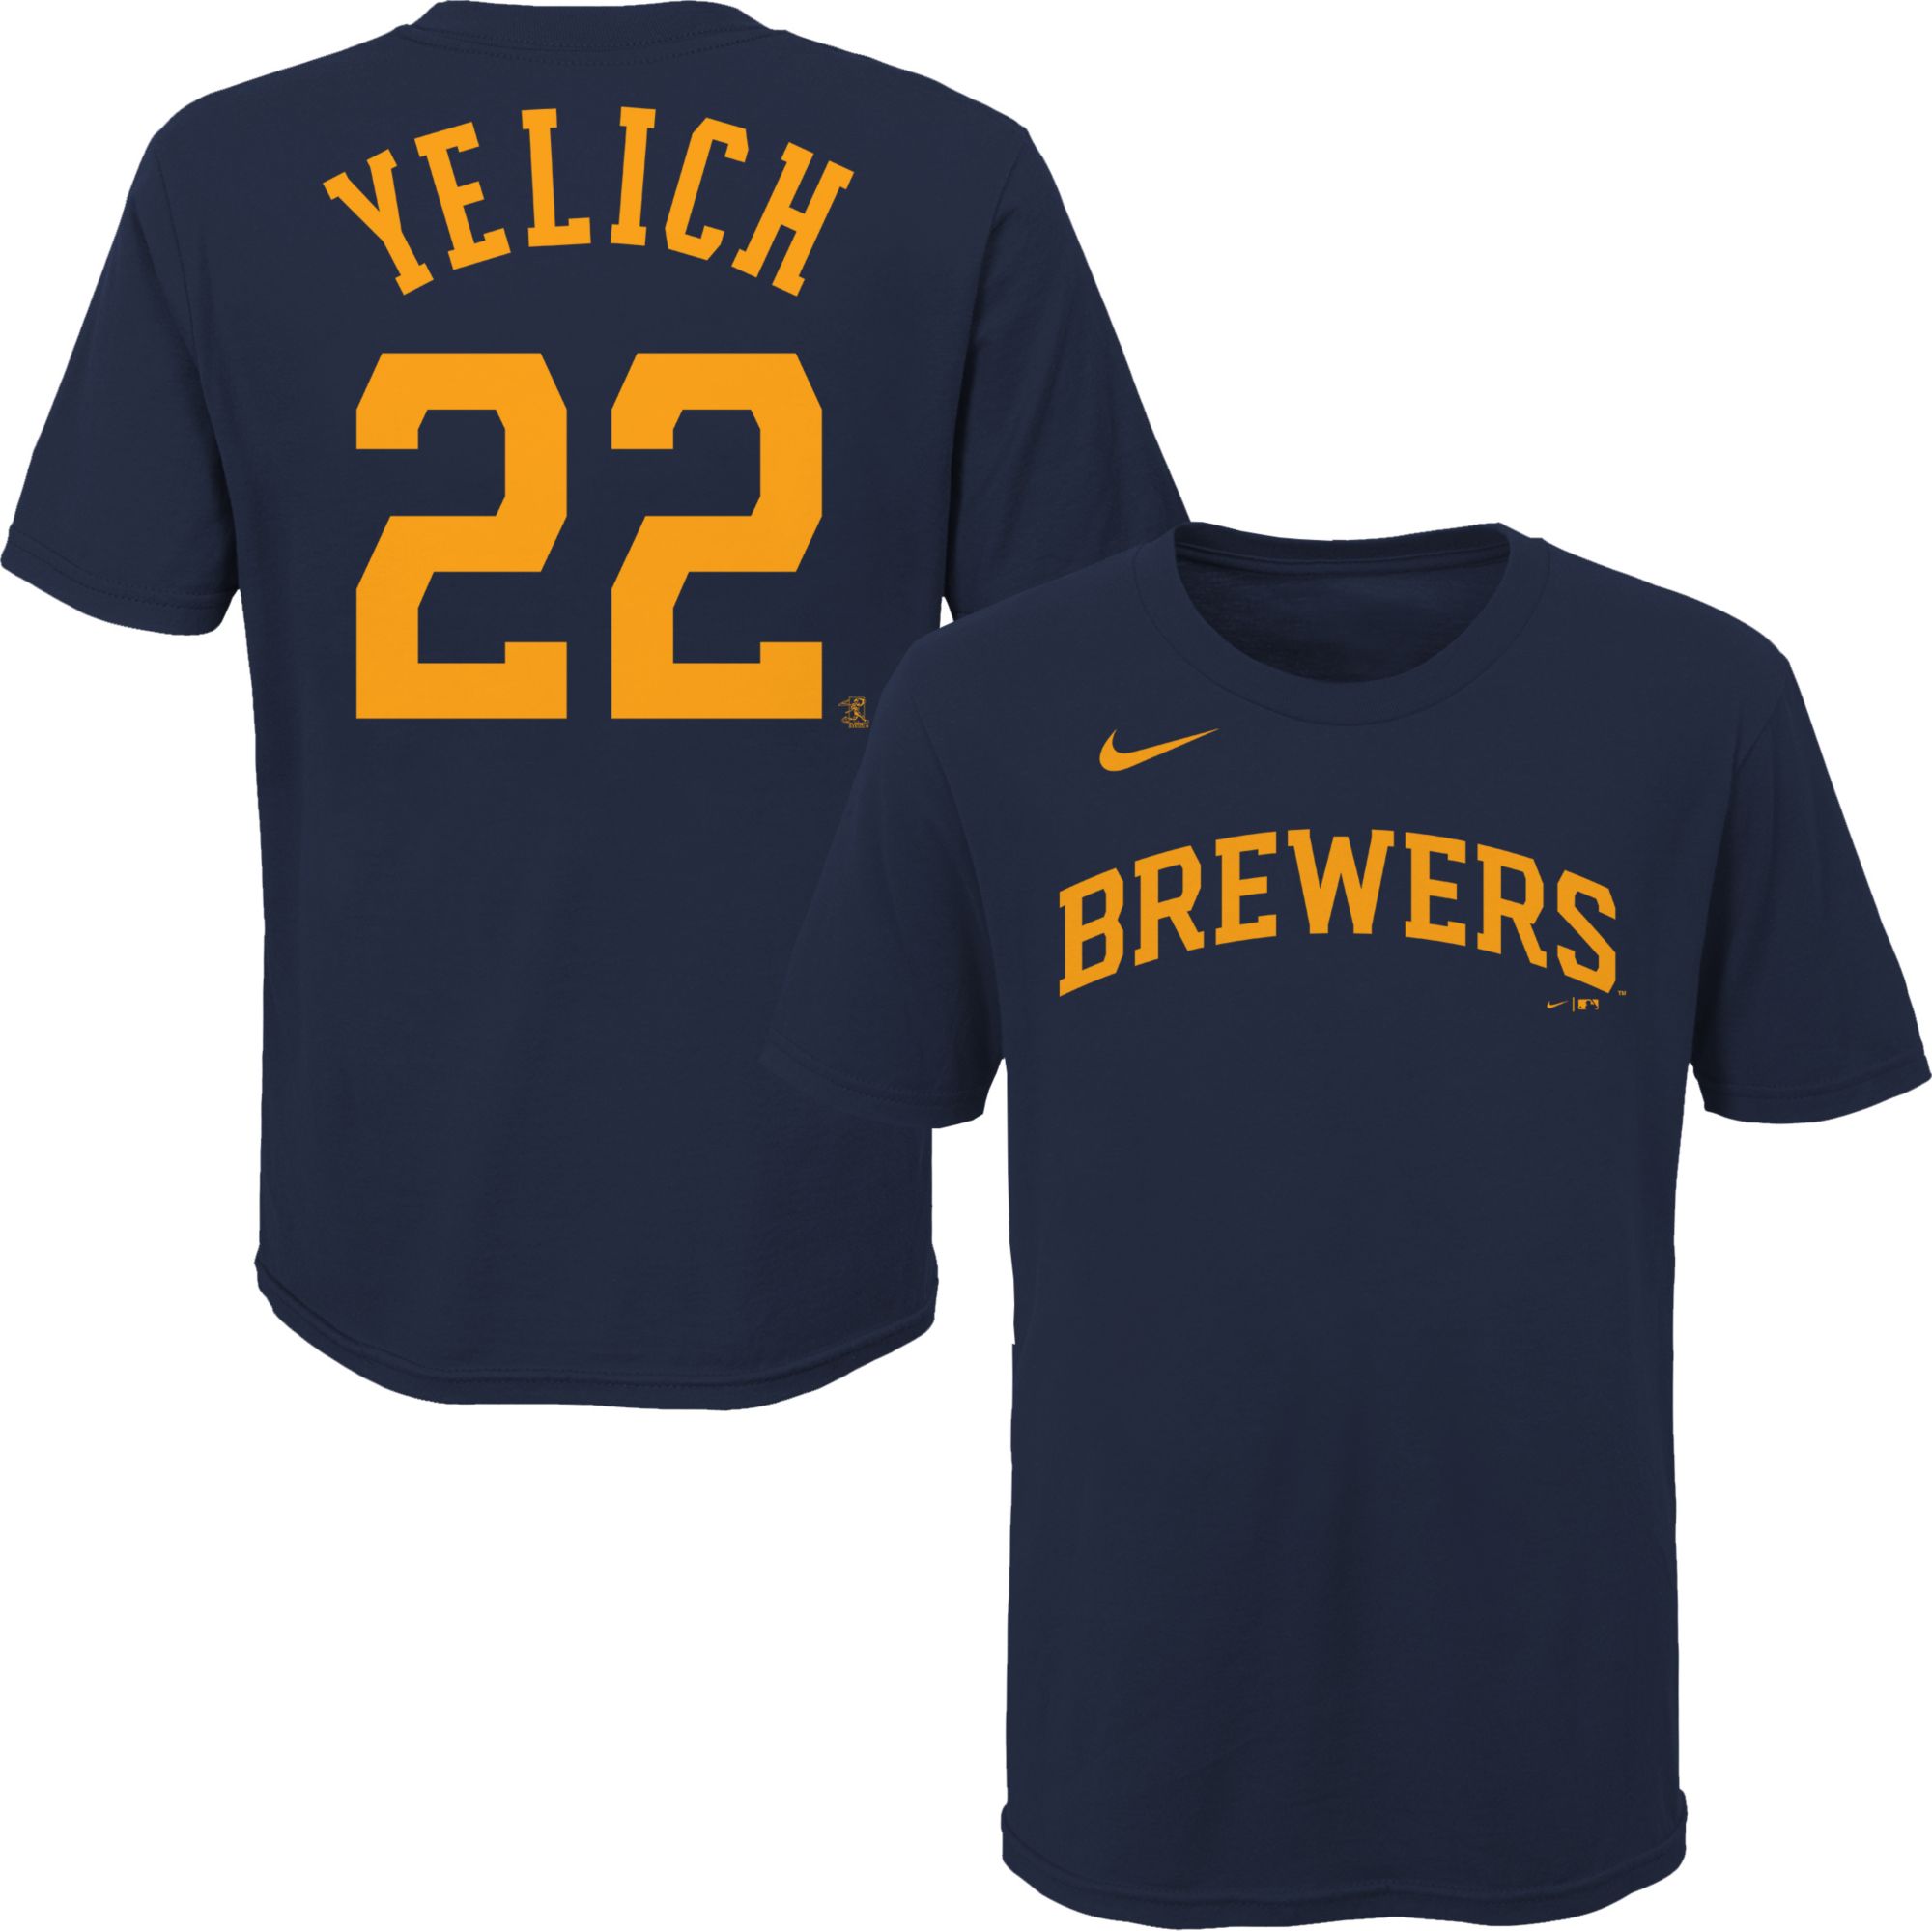 Christian Yelich Essential T-Shirt for Sale by KOGraphics